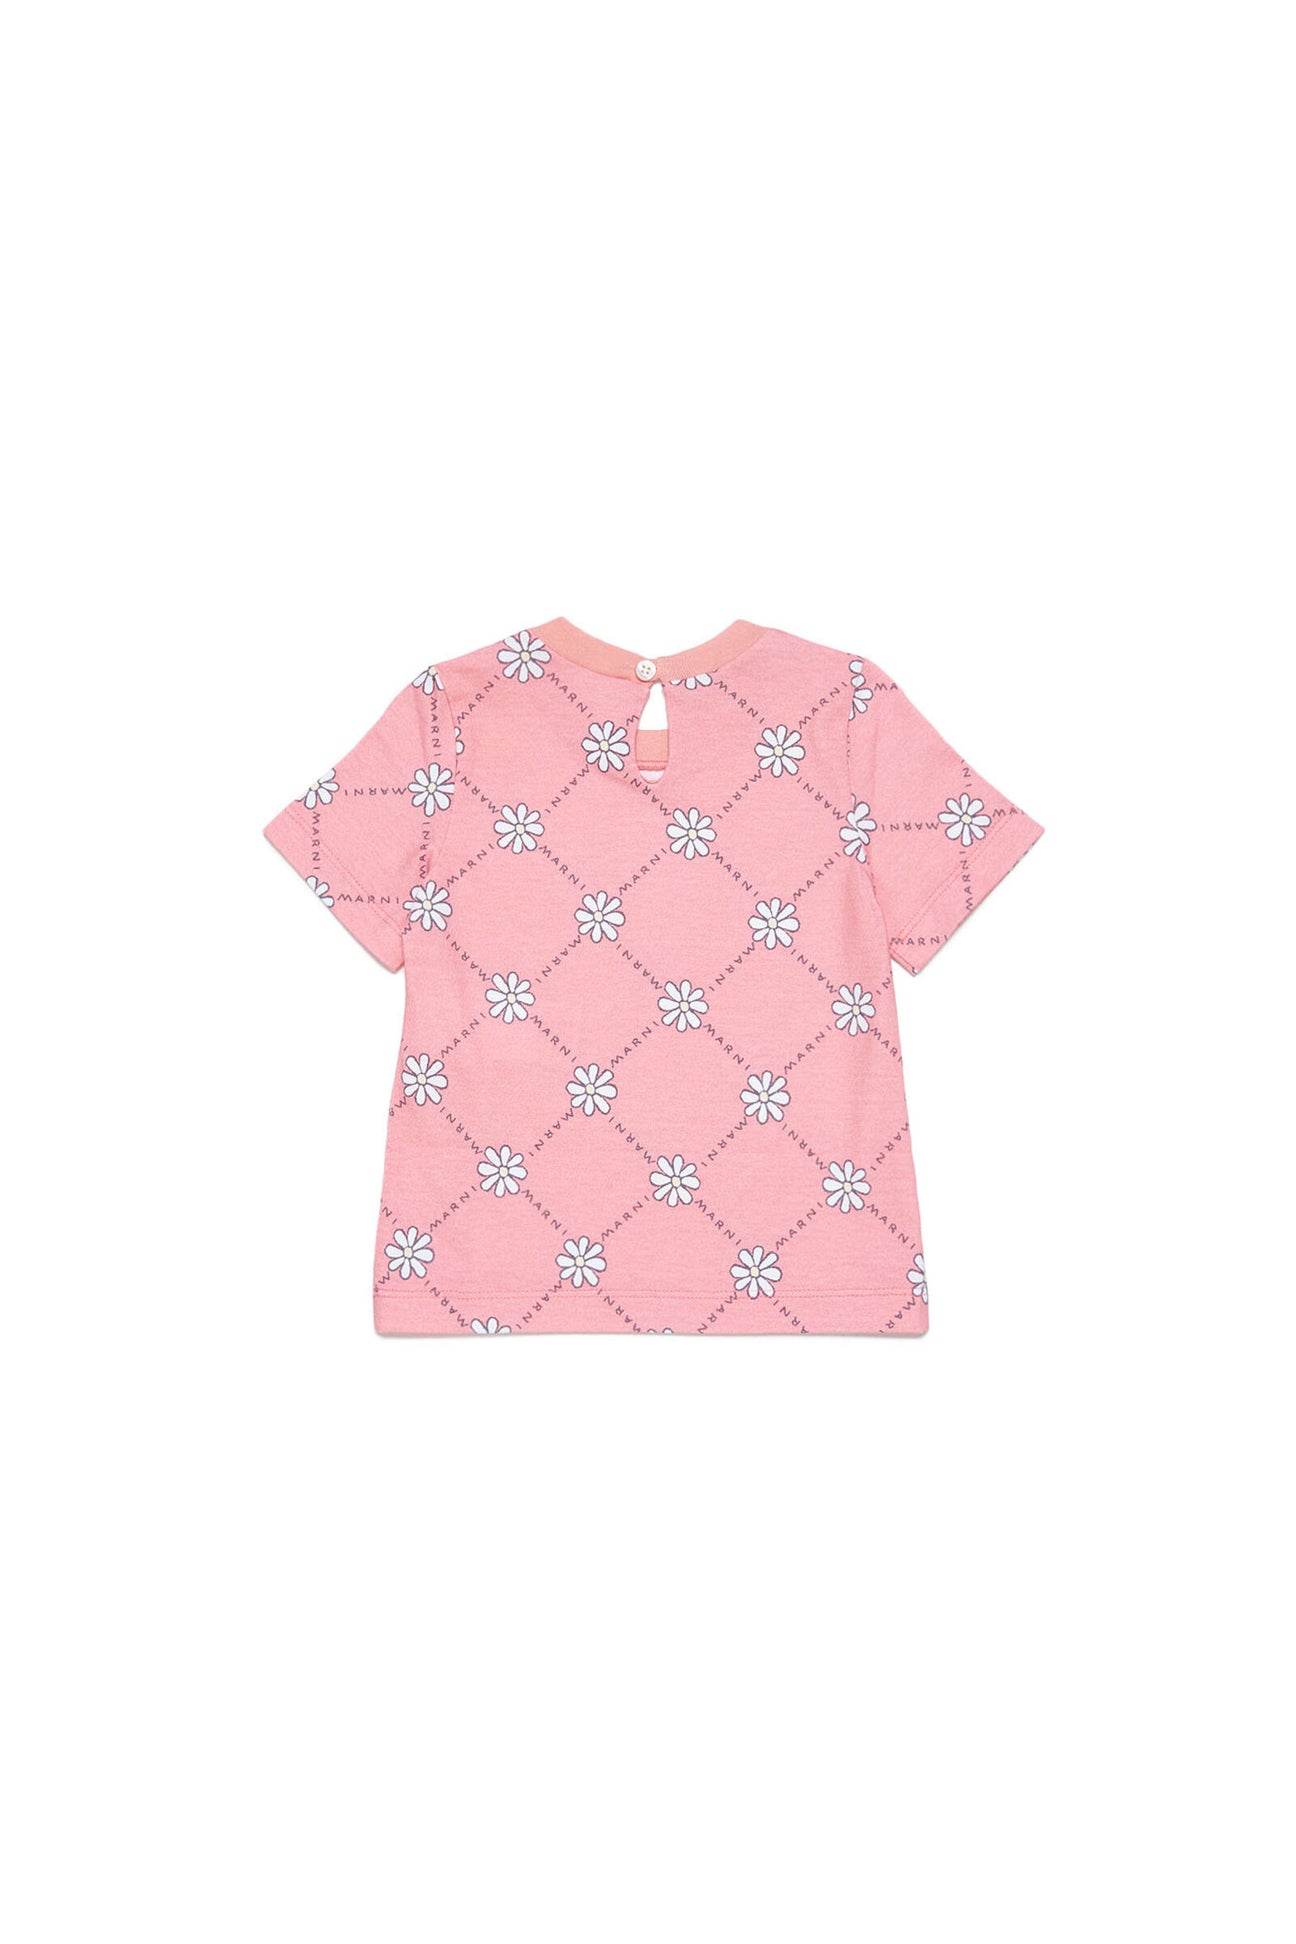 Peach pink cotton t-shirt with daisy pattern Peach pink cotton t-shirt with daisy pattern